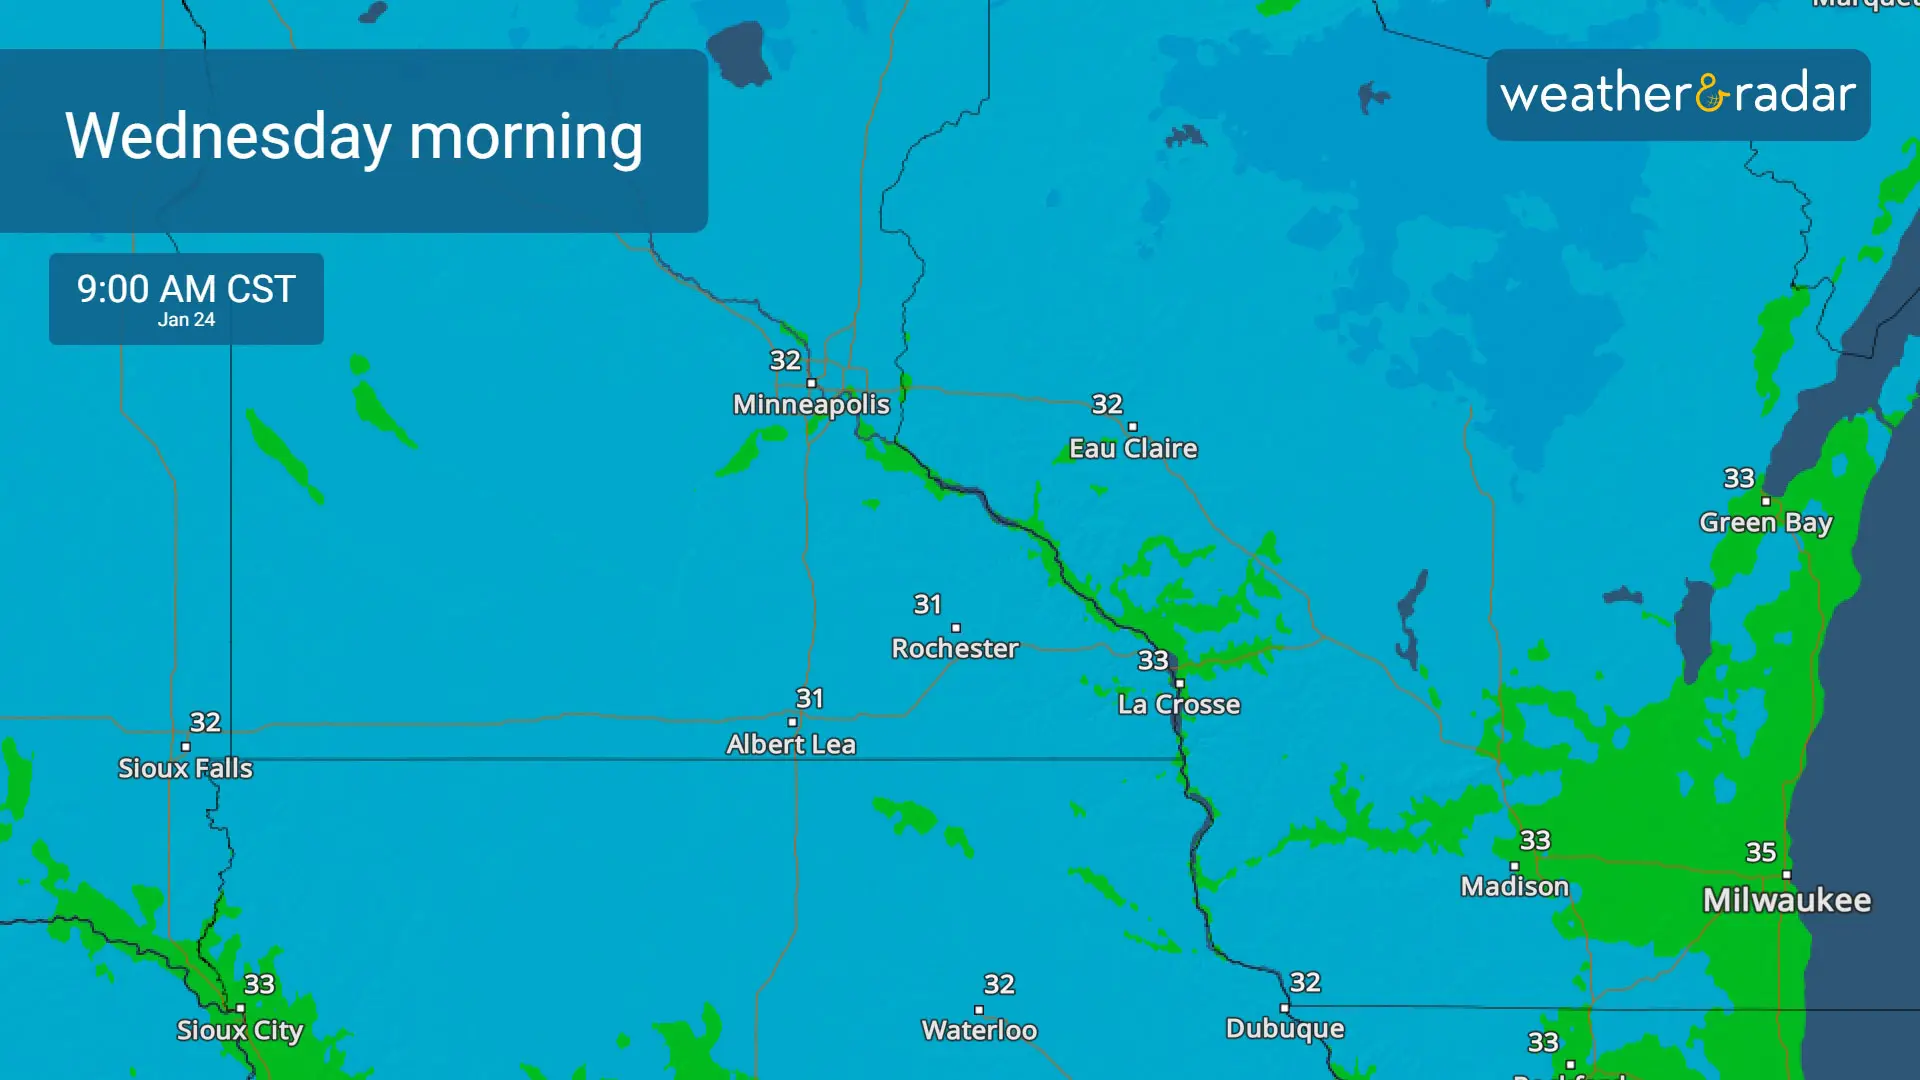 Wednesday morning lows across the Upper Midwest